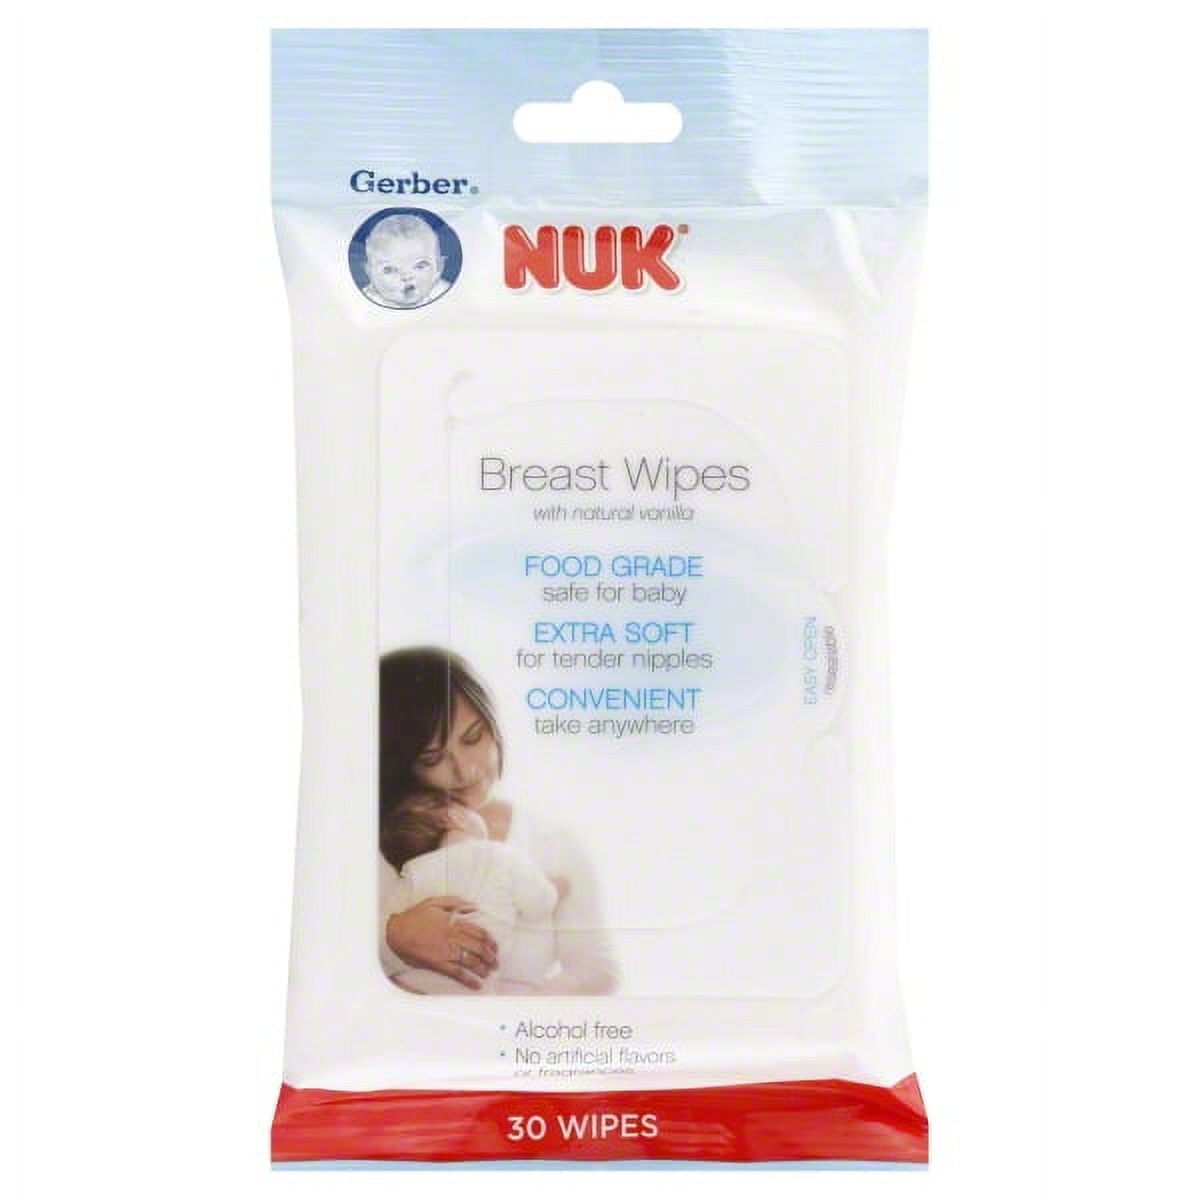 Gerber Nuk Breast Wipes 30 Count - image 1 of 3